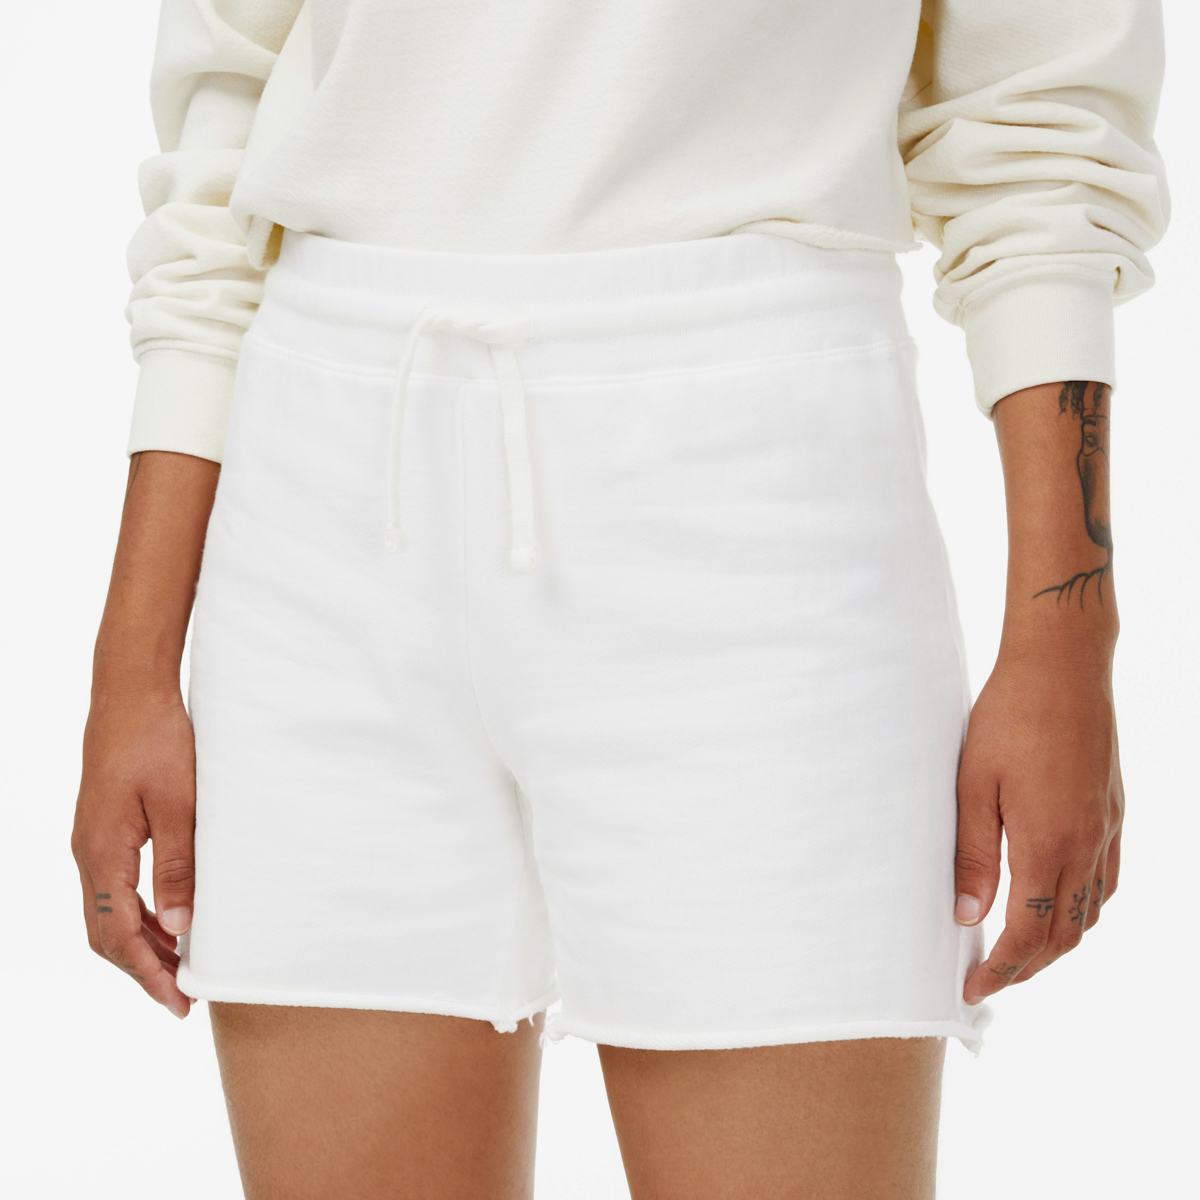 RecycledTerryShorts_OffWhite_Womens_OnFigure_1x1_0924.jpg